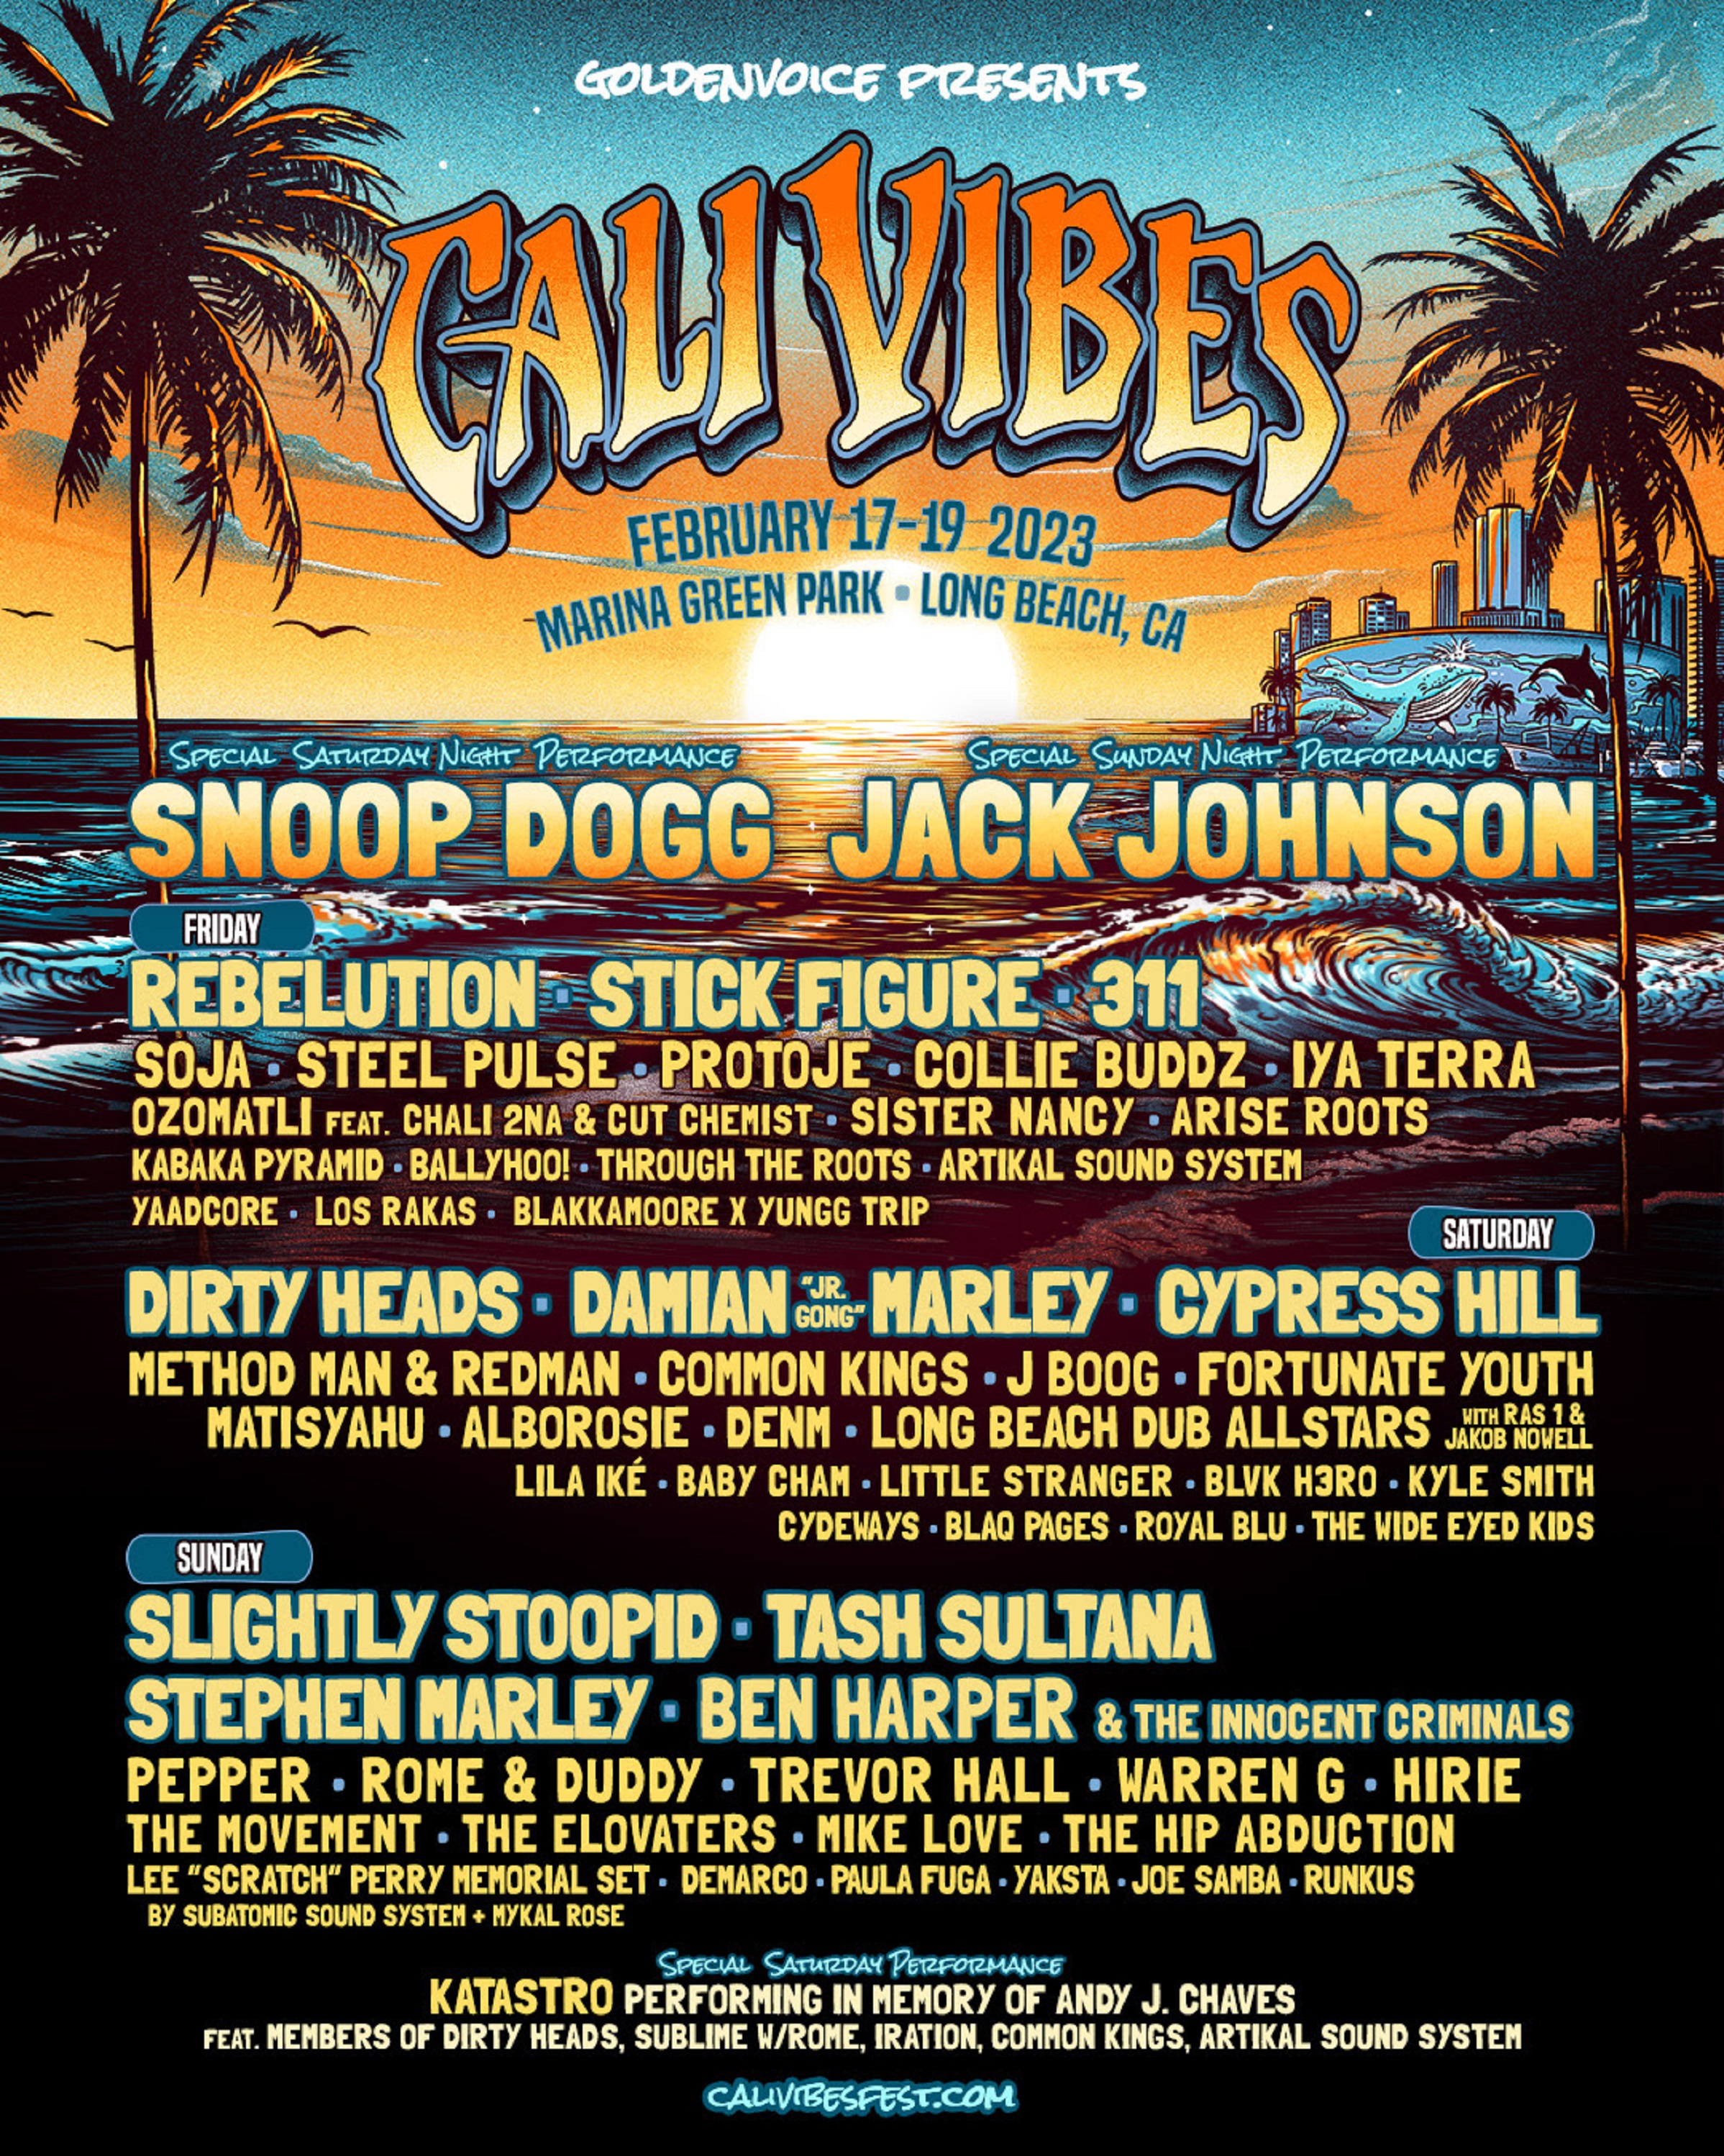 Snoop Dogg, Cypress Hill and more just added to Cali Vibes Fest in Long Beach Feb 17-19